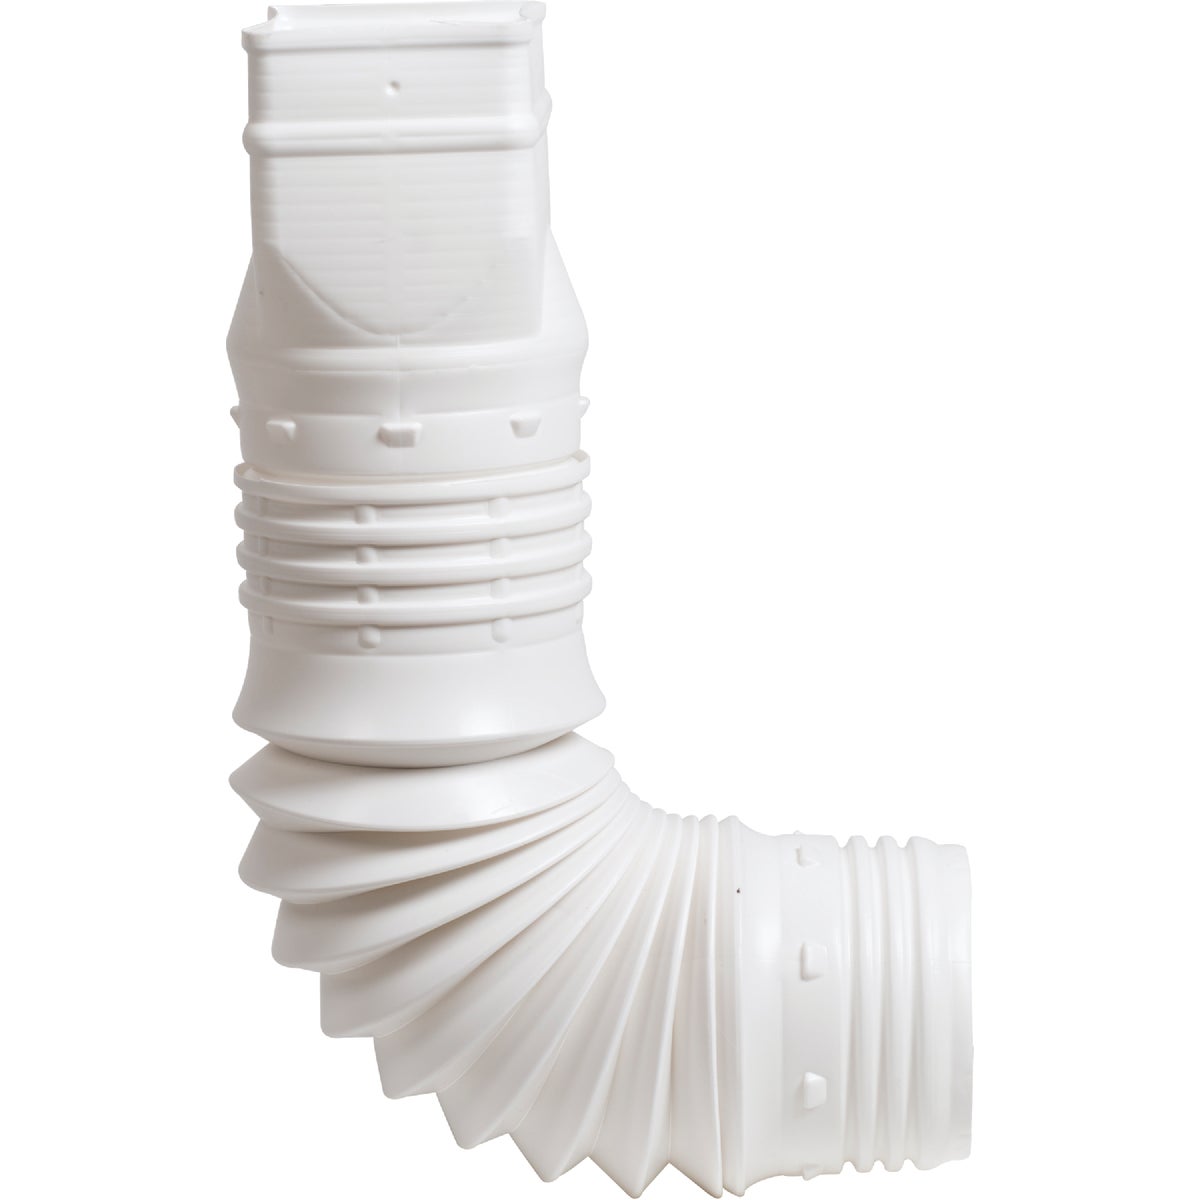 Amerimax Flex-A-Spout 2 In. X 3 In. X 3 In. Or 4 In. Downspout Adapter